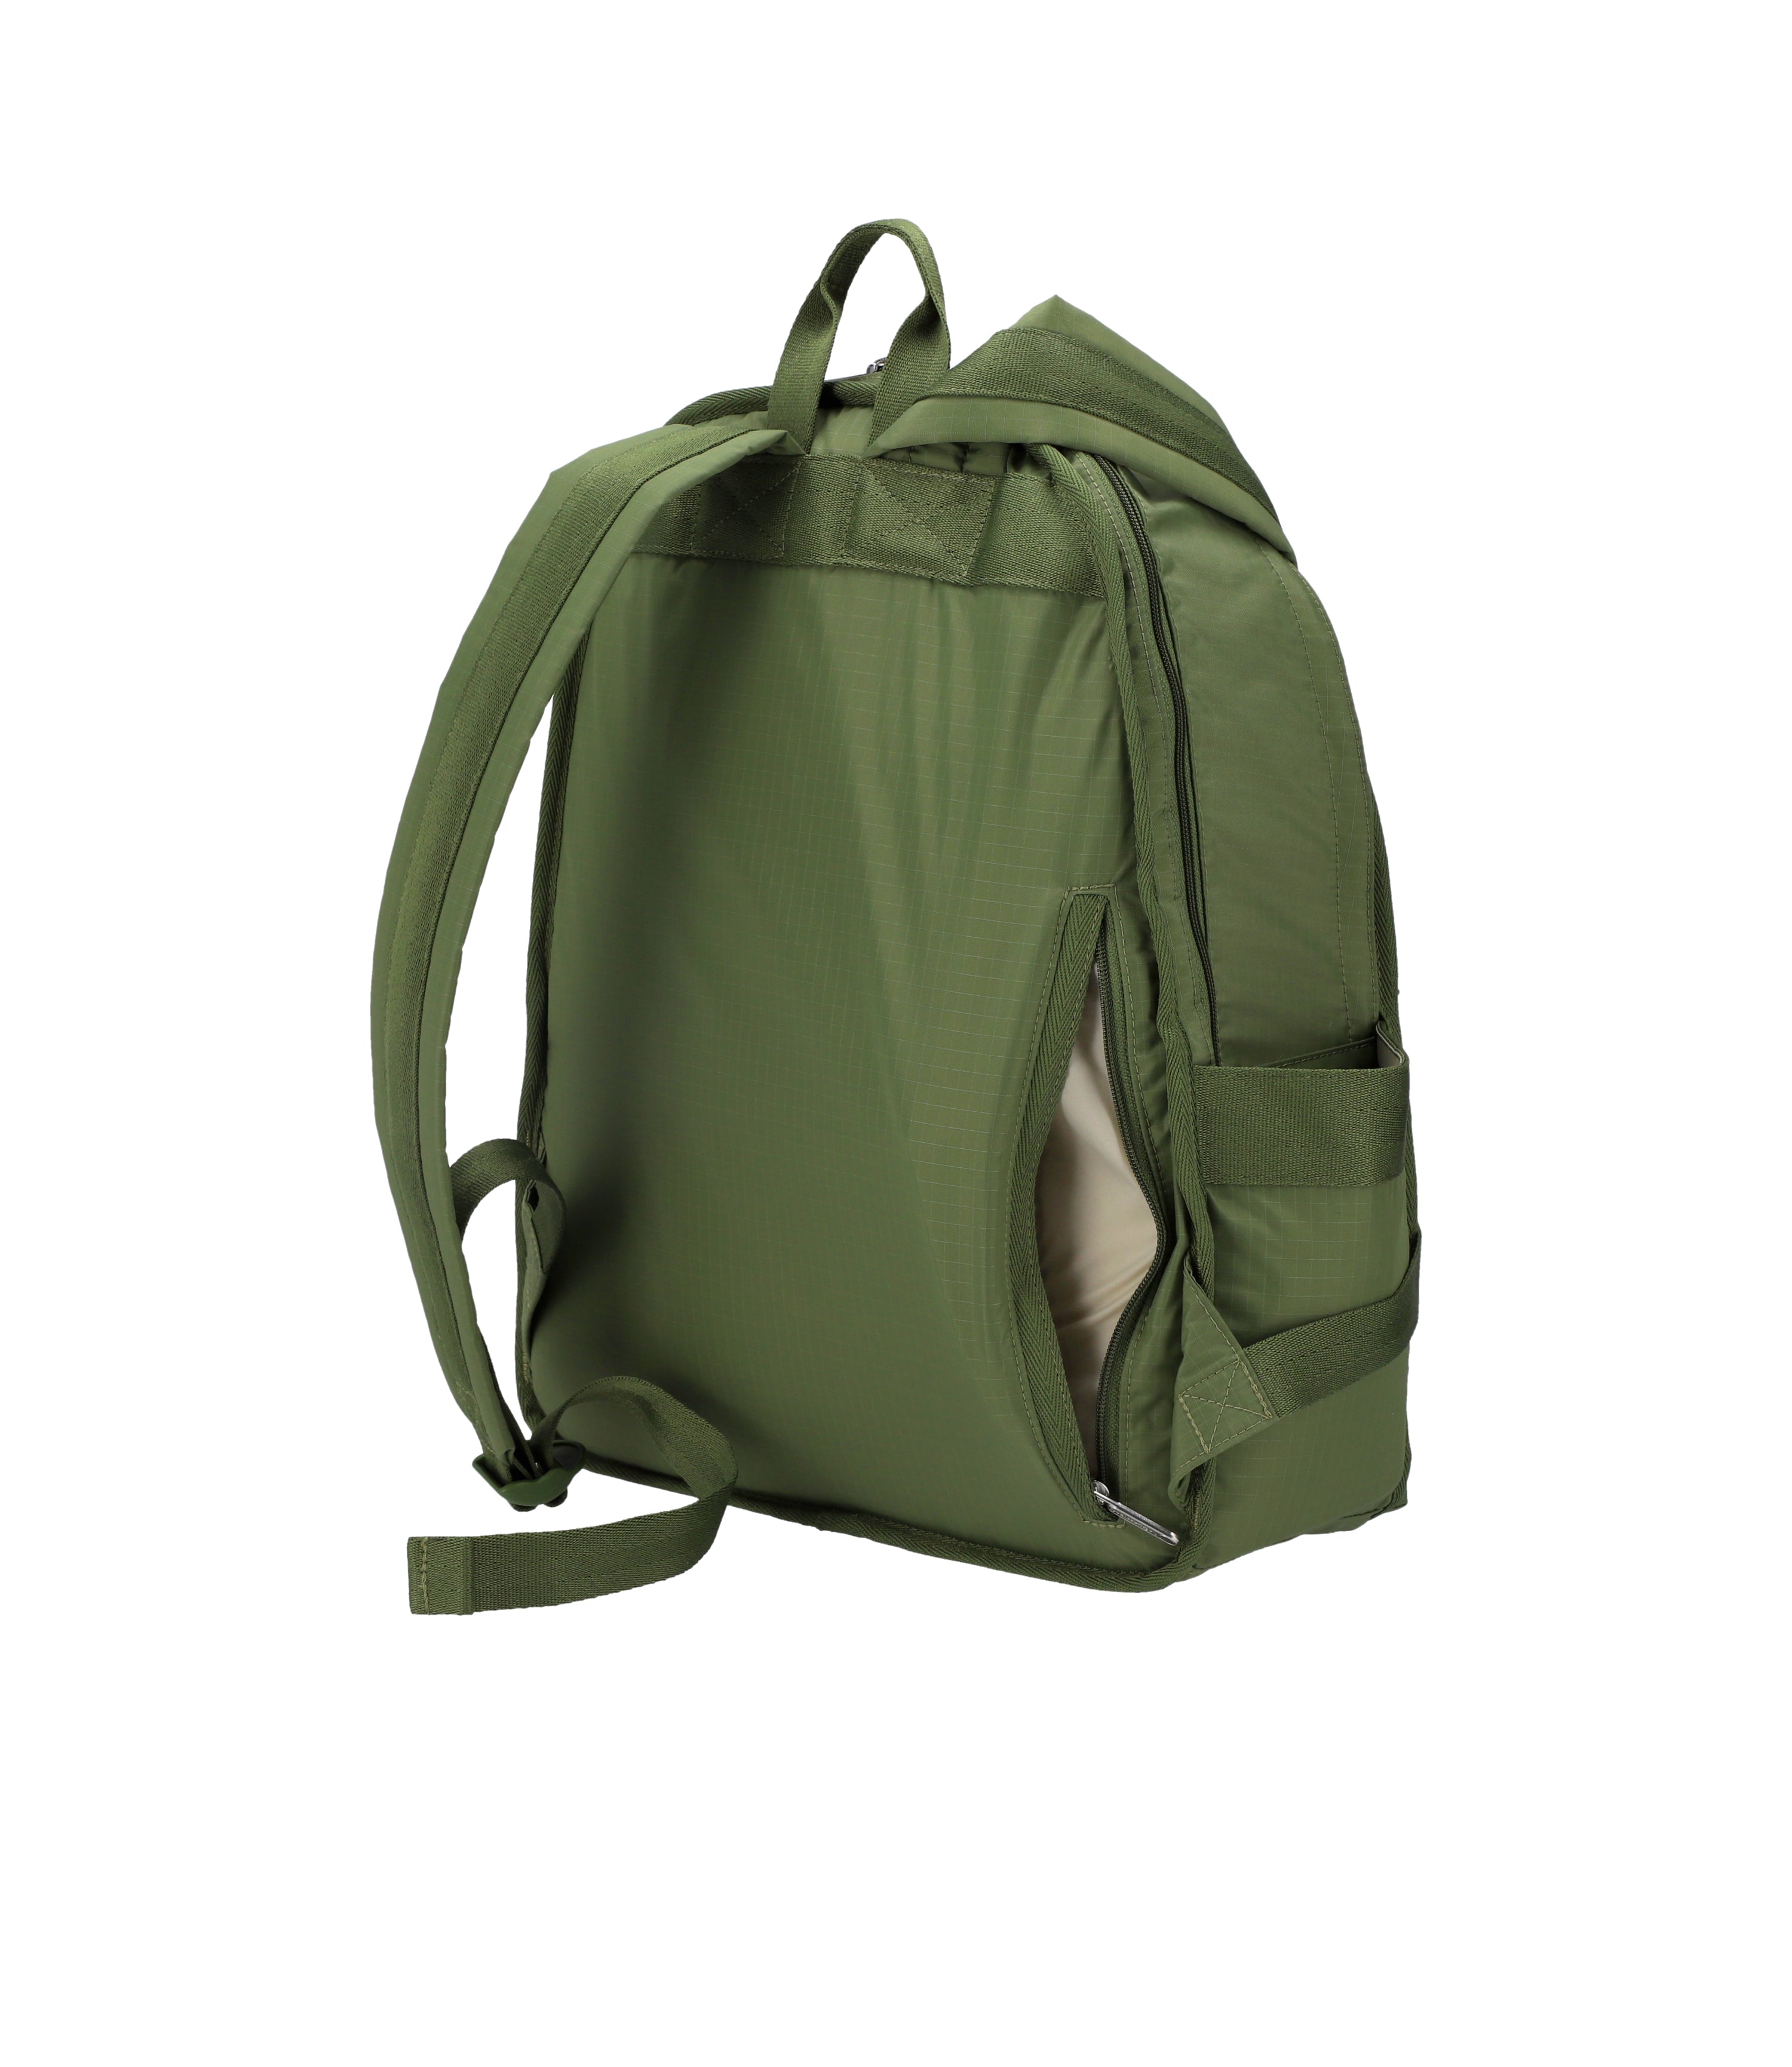 Route Backpack - Olive solid – LeSportsac